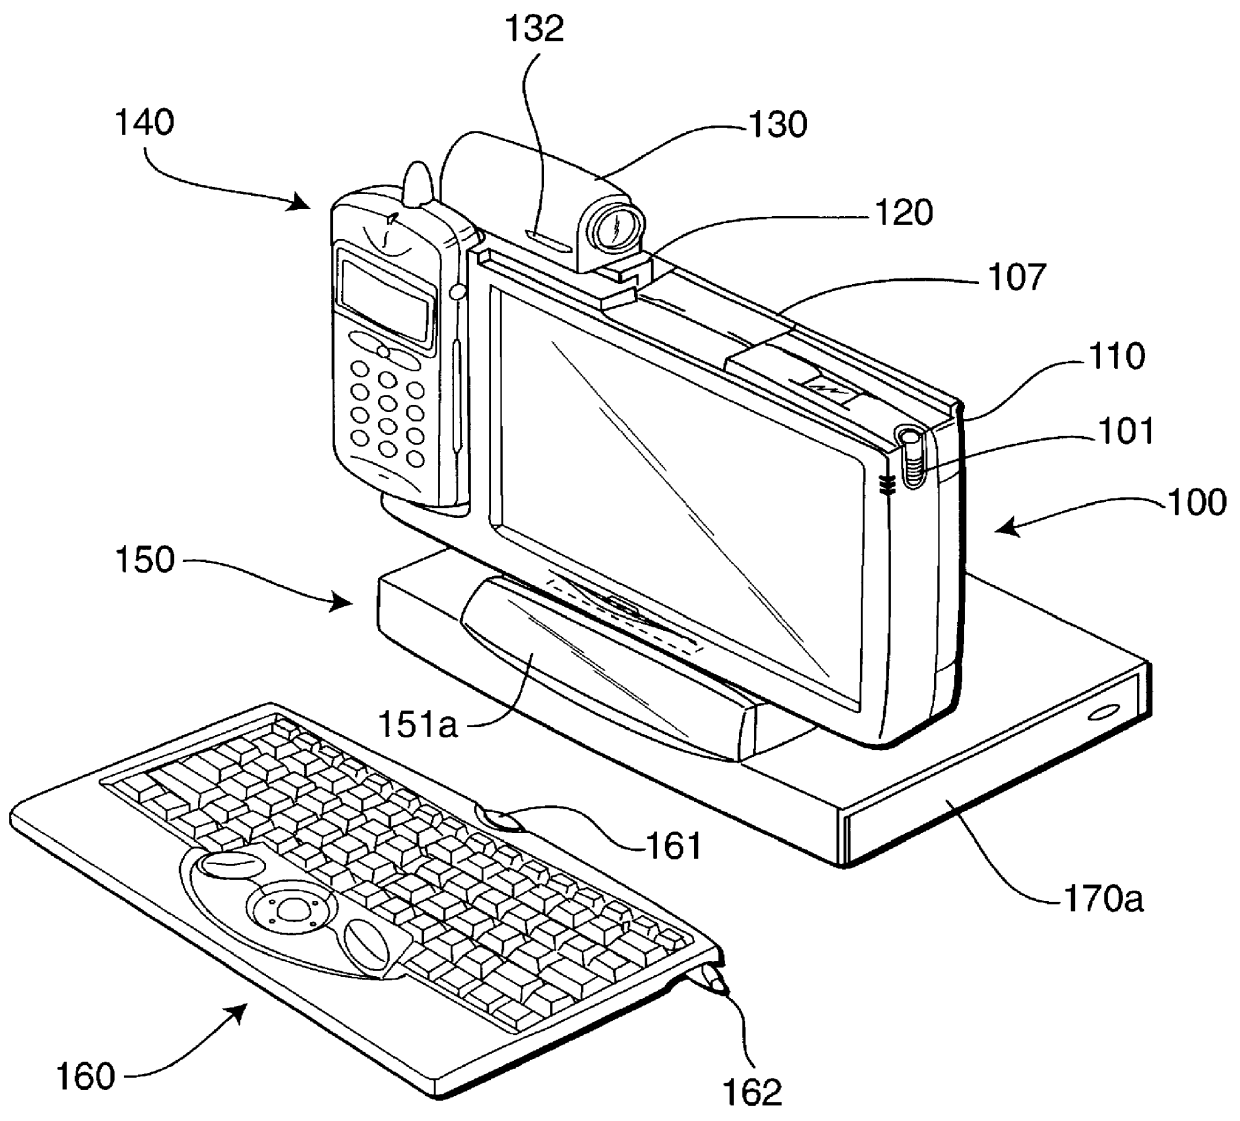 Portable computer on which a communication device can be mounted